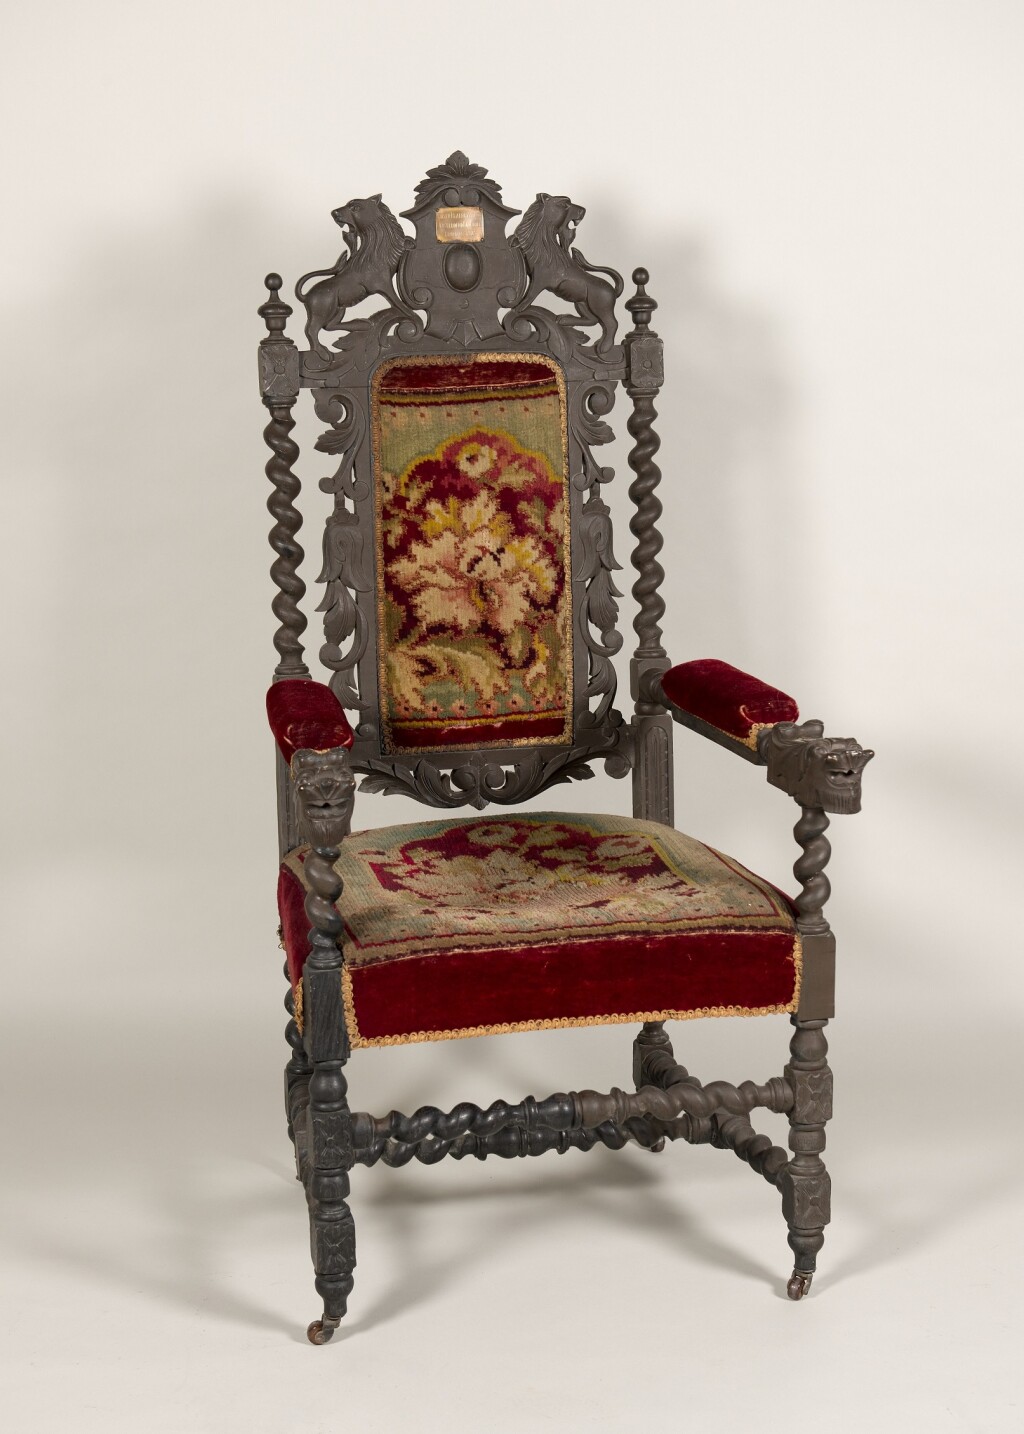 ‘The most beautiful work of art’ - the Eisteddfod chair